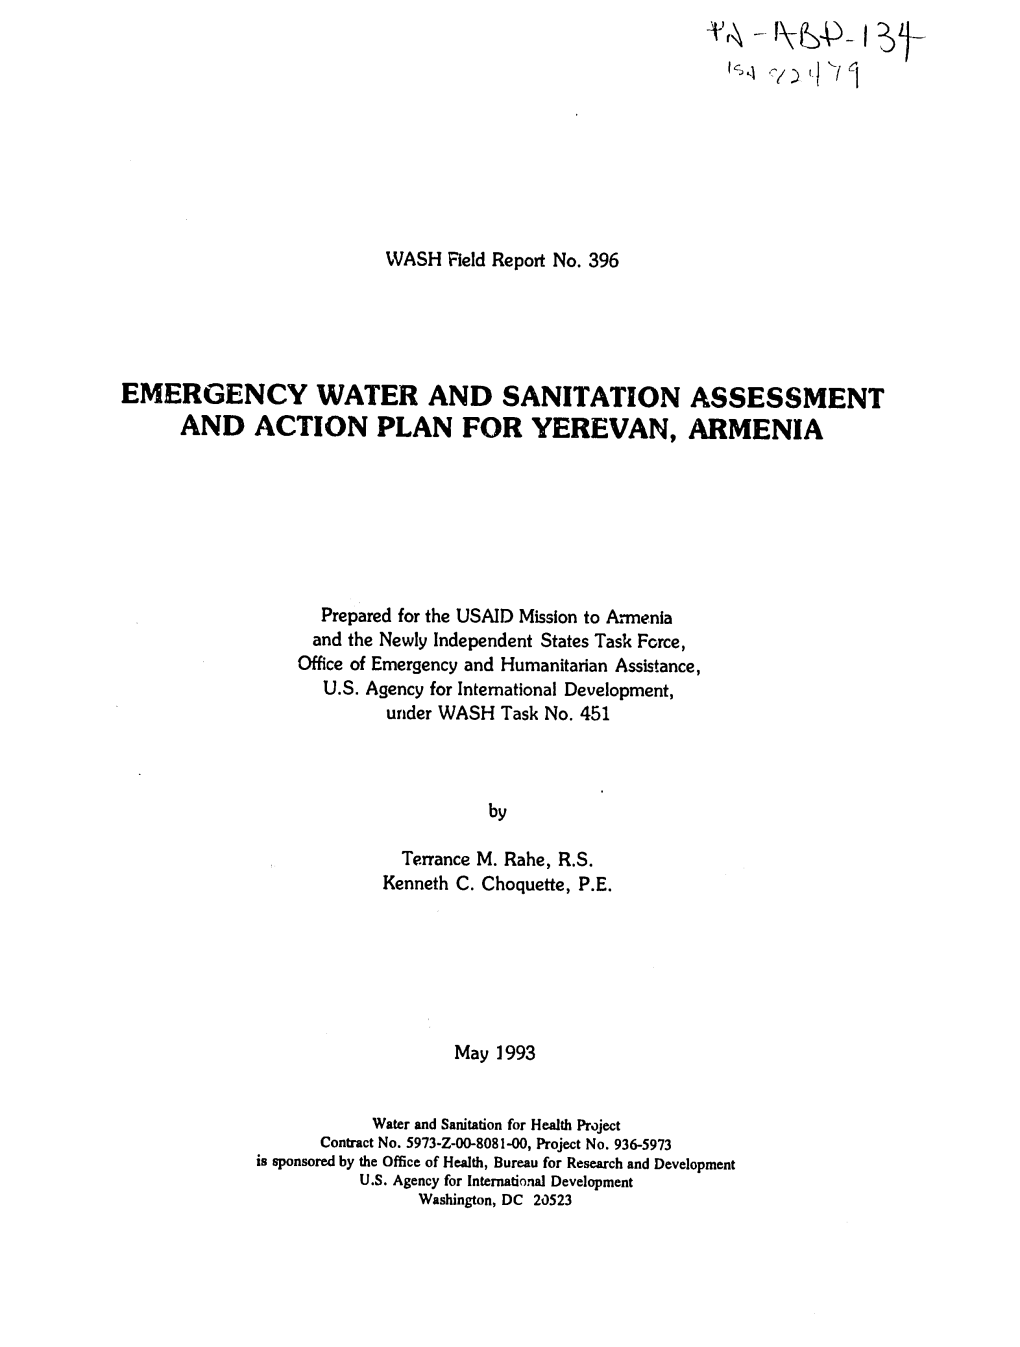 Emergency Water and Sanitation Assessment and Action Plan for Yerevan, Armenia